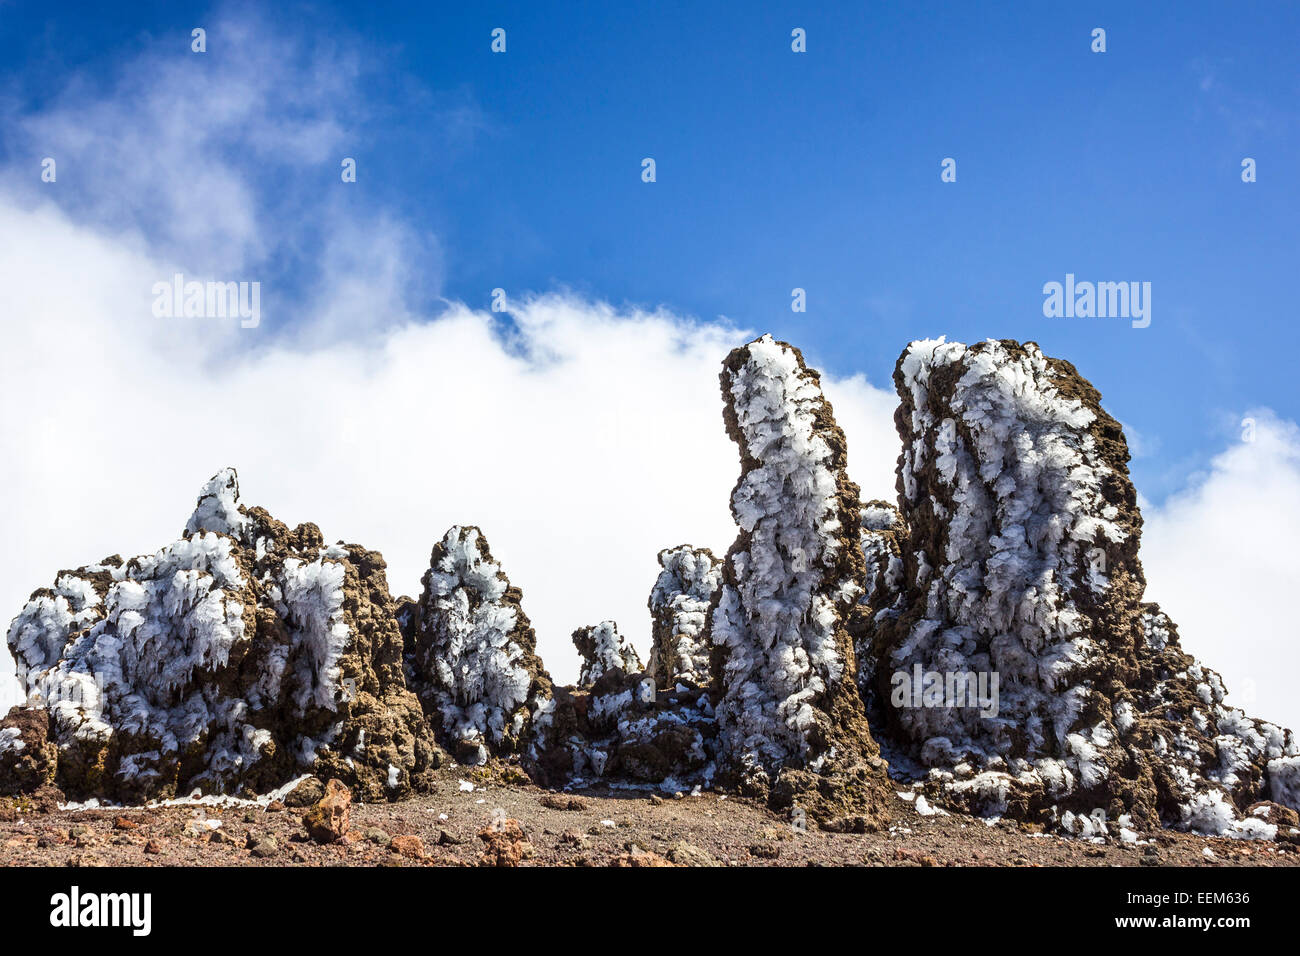 Roque de los Muchachos, rock formation covered with ice, La Palma, Canary Islands, Spain Stock Photo